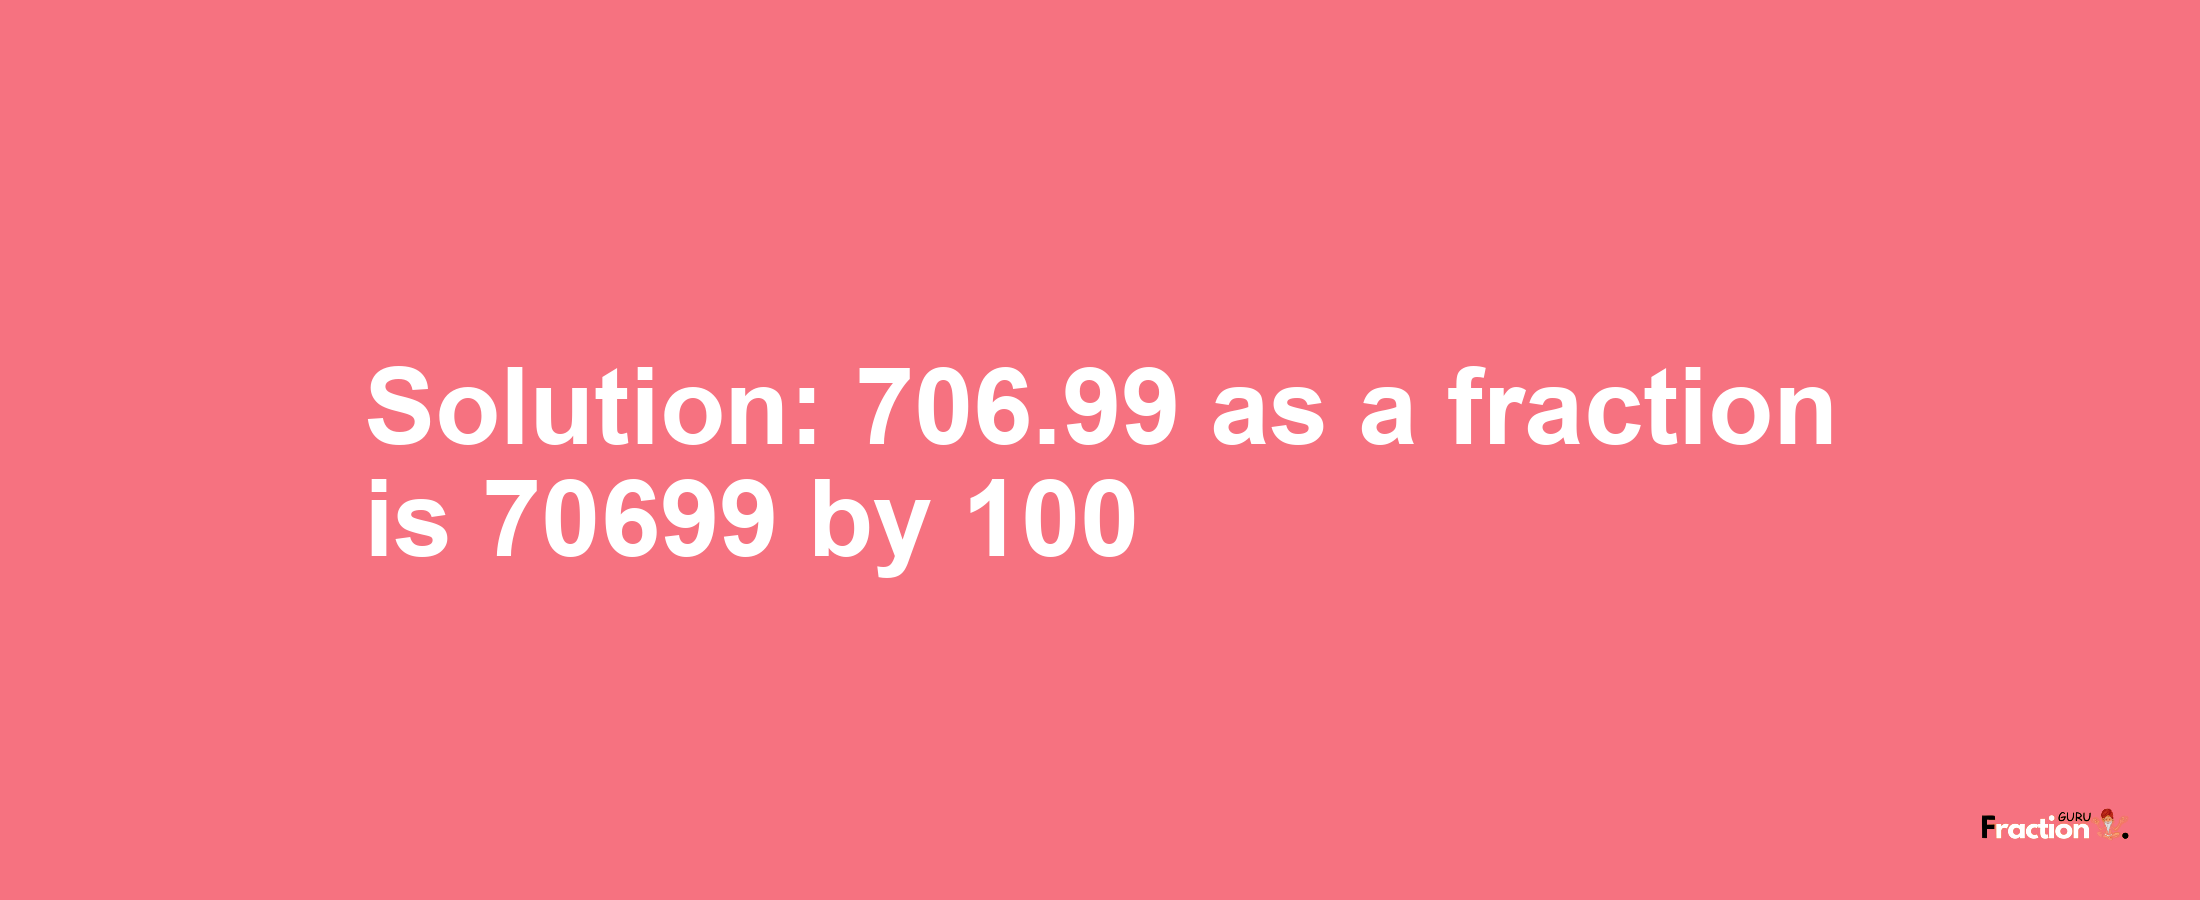 Solution:706.99 as a fraction is 70699/100